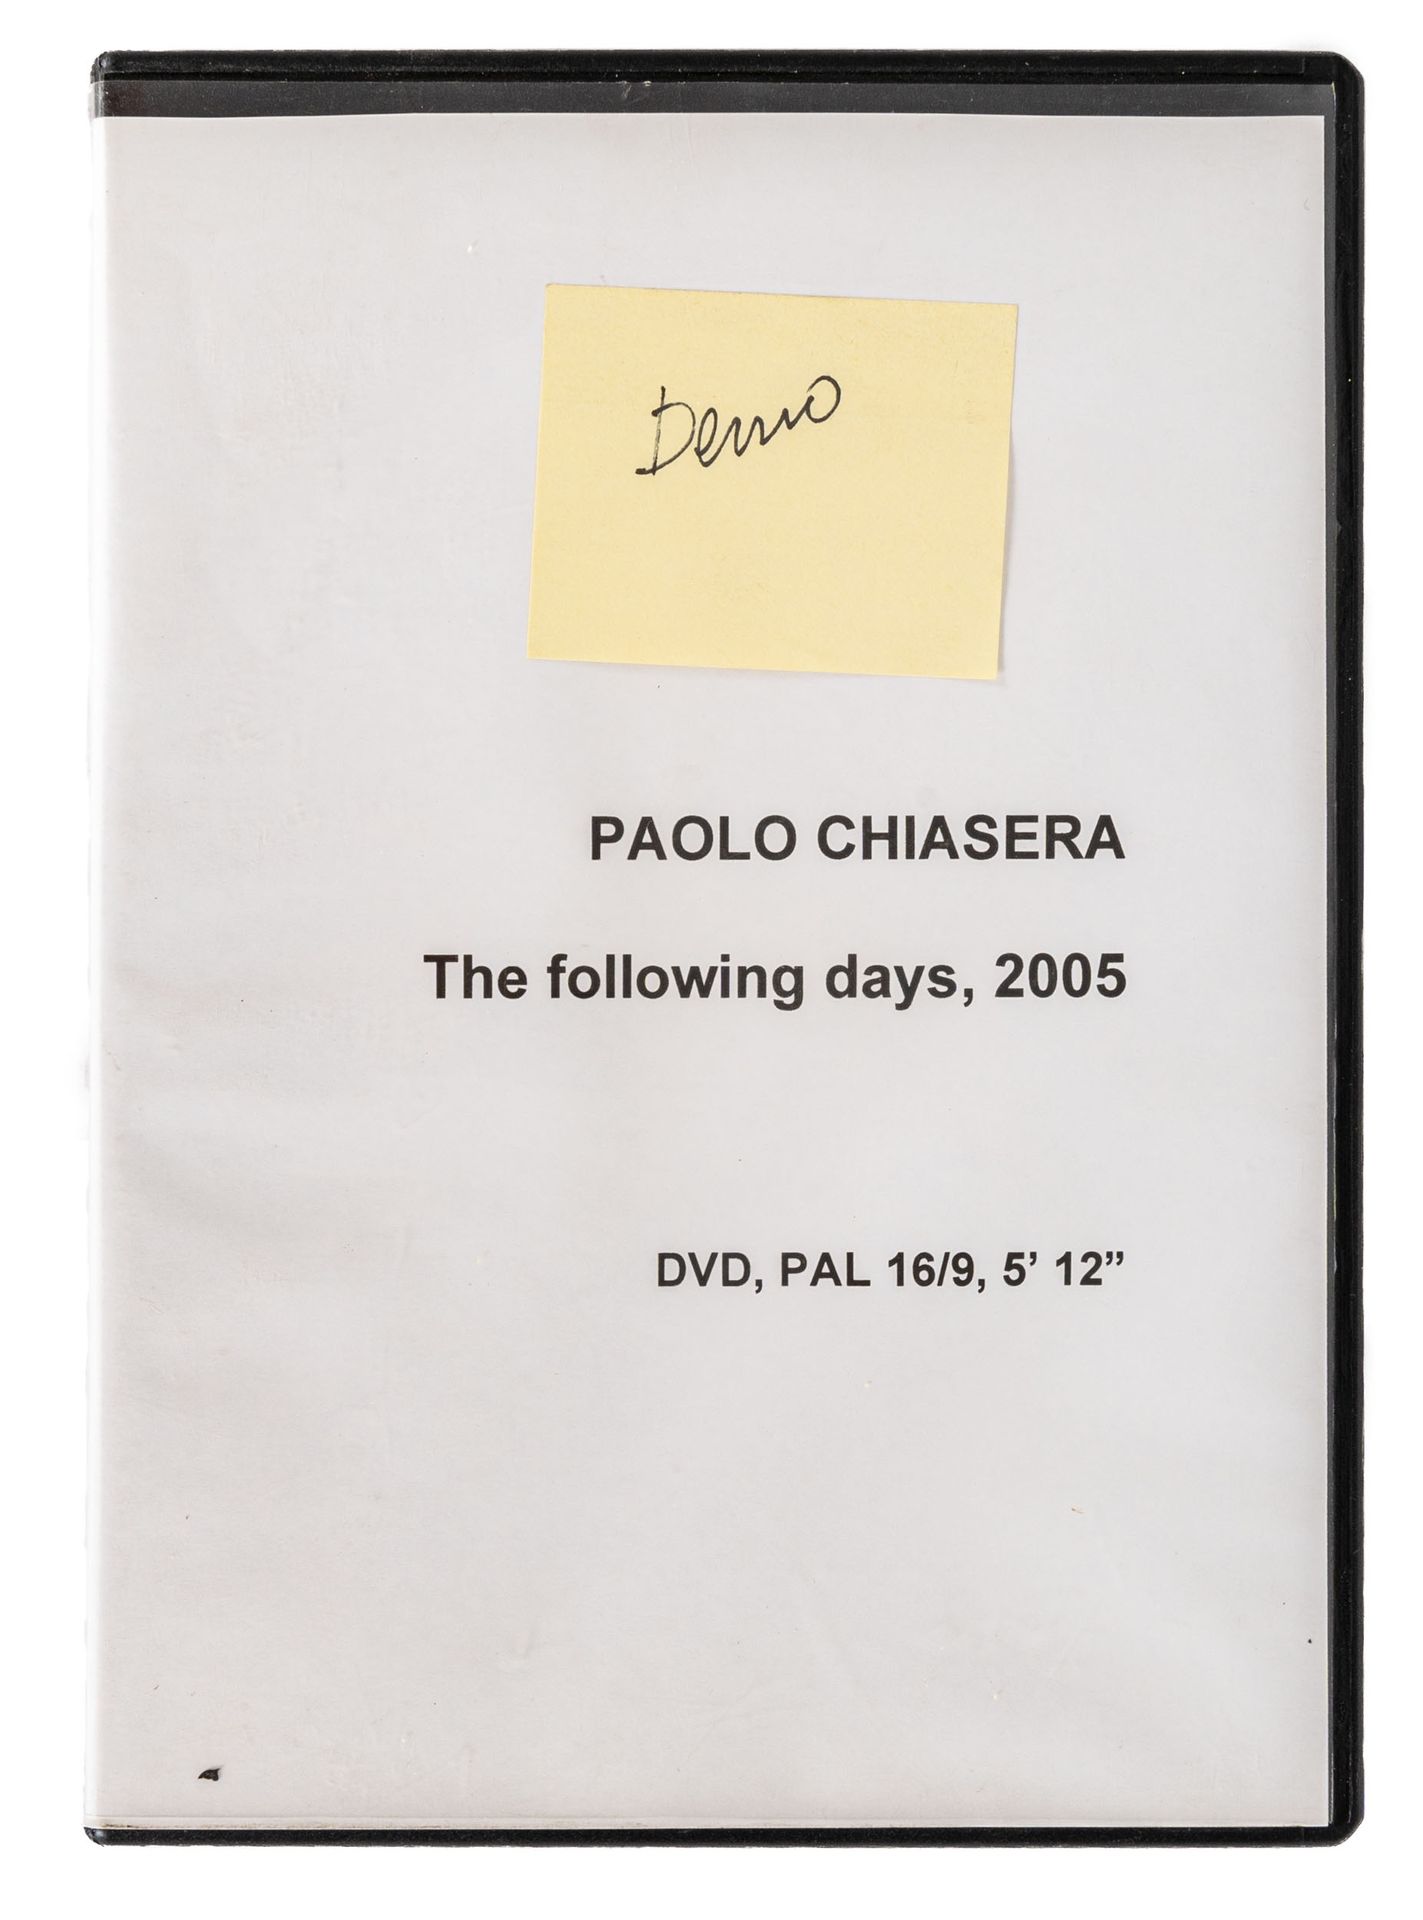 PAOLO CHIASERA PAUL CHIASERA

(1978)

Untitled

Video DVD and VHS of artist's do&hellip;